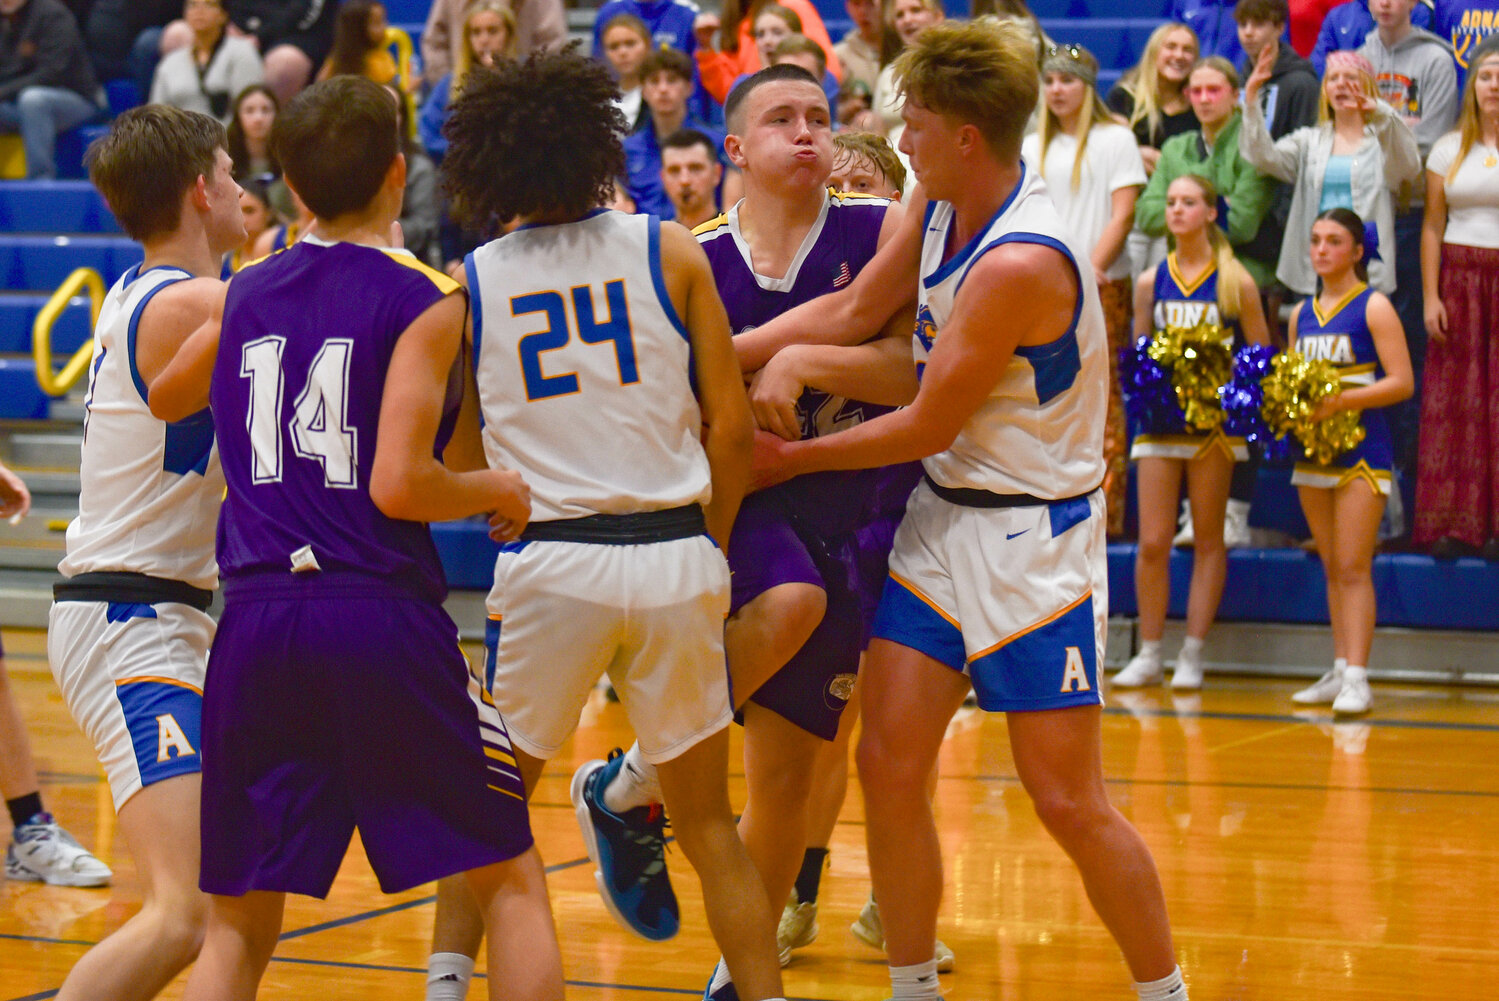 Justin Jacoby takes the ball to the rim during Adna's 78-37 win over Onalaska Dec. 7.